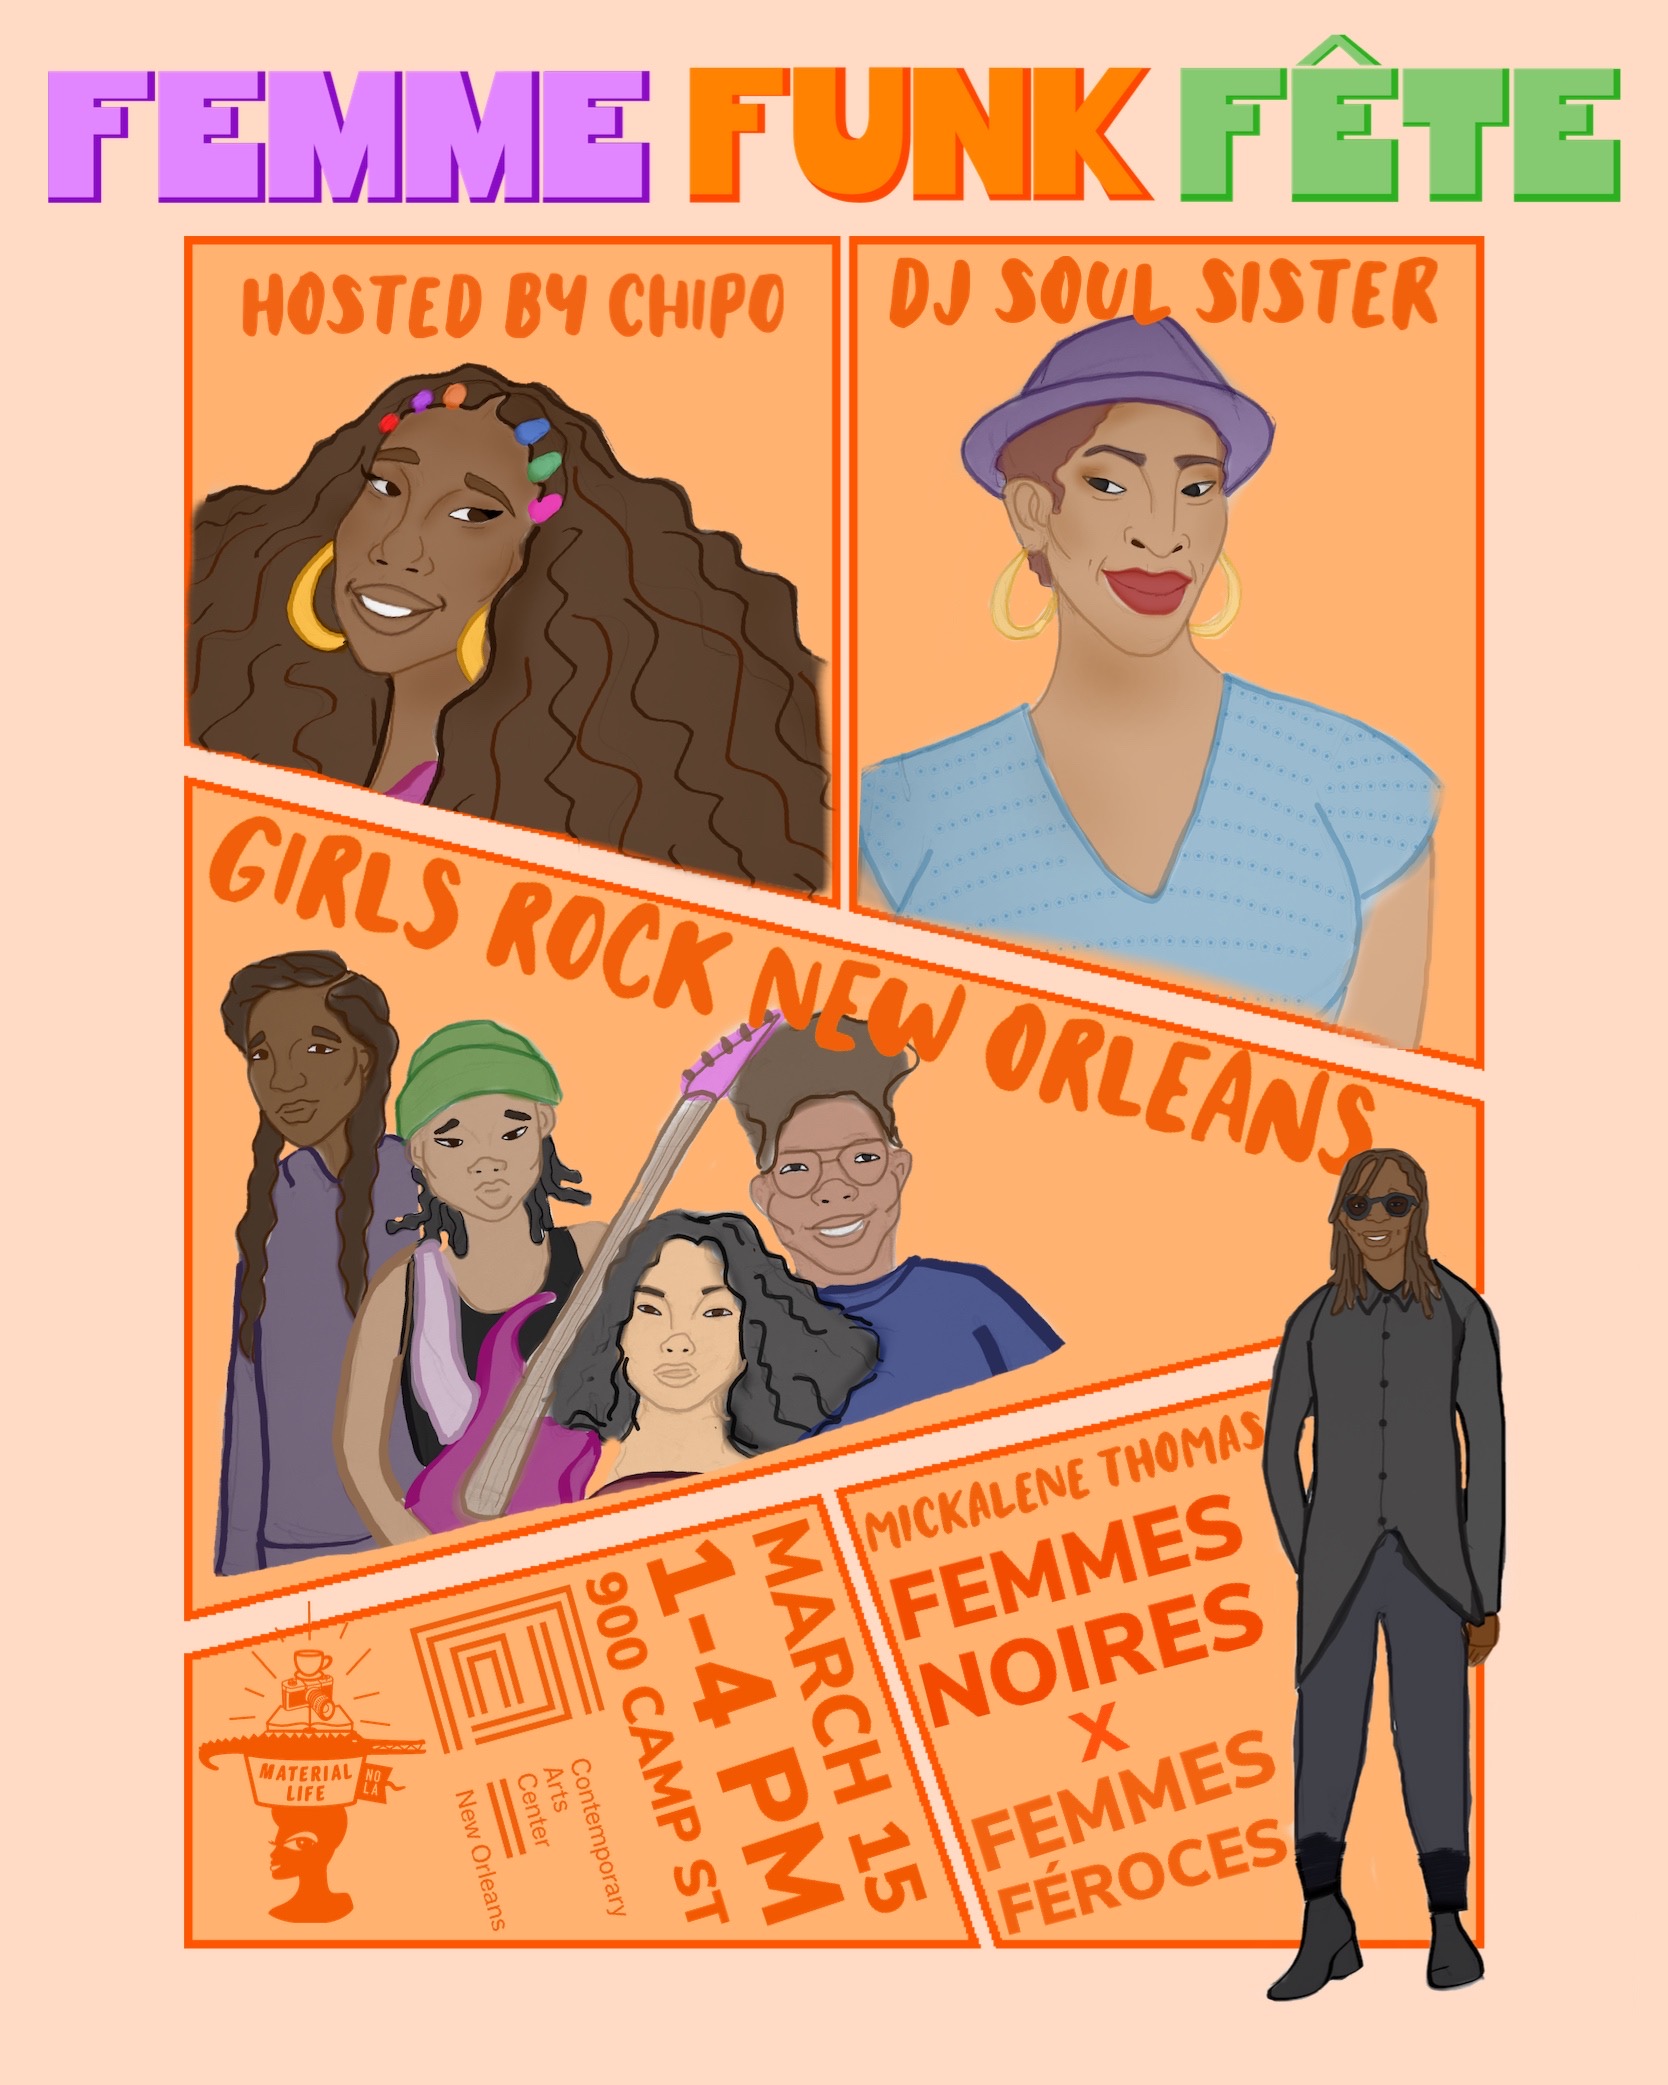 POSTPONED - Joie Noire: Femme Funk Fête | SUNDAY VIBES at the CAC